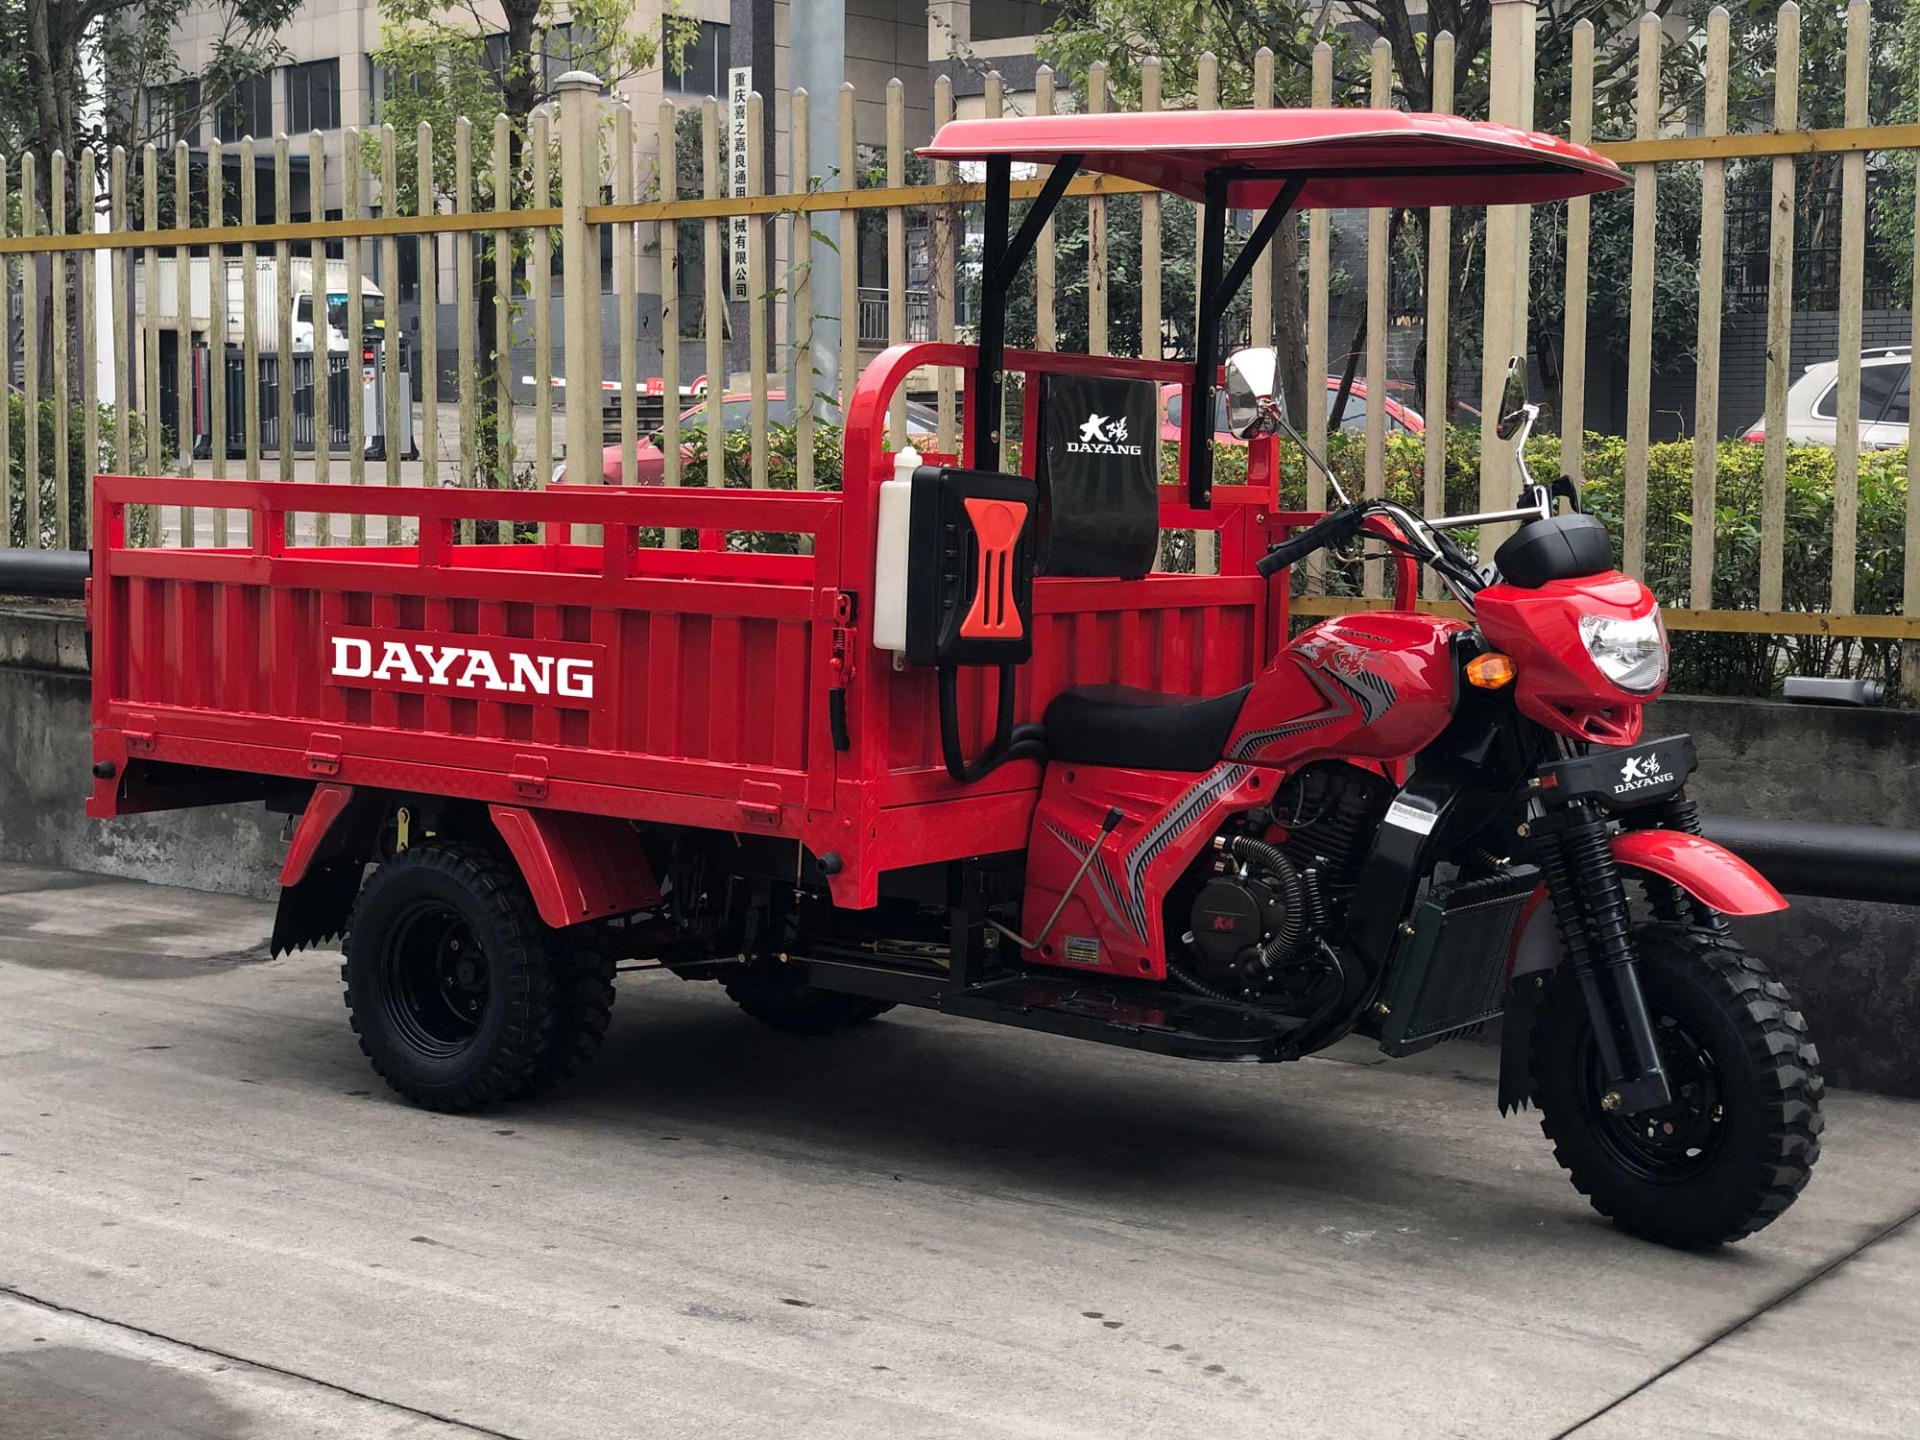 Hight Quality 350cc Motorcycle Tricycle 3Wheel heavy loading truck Cargo Tricycle for Adult Power Engine water-cooled Drum Brake